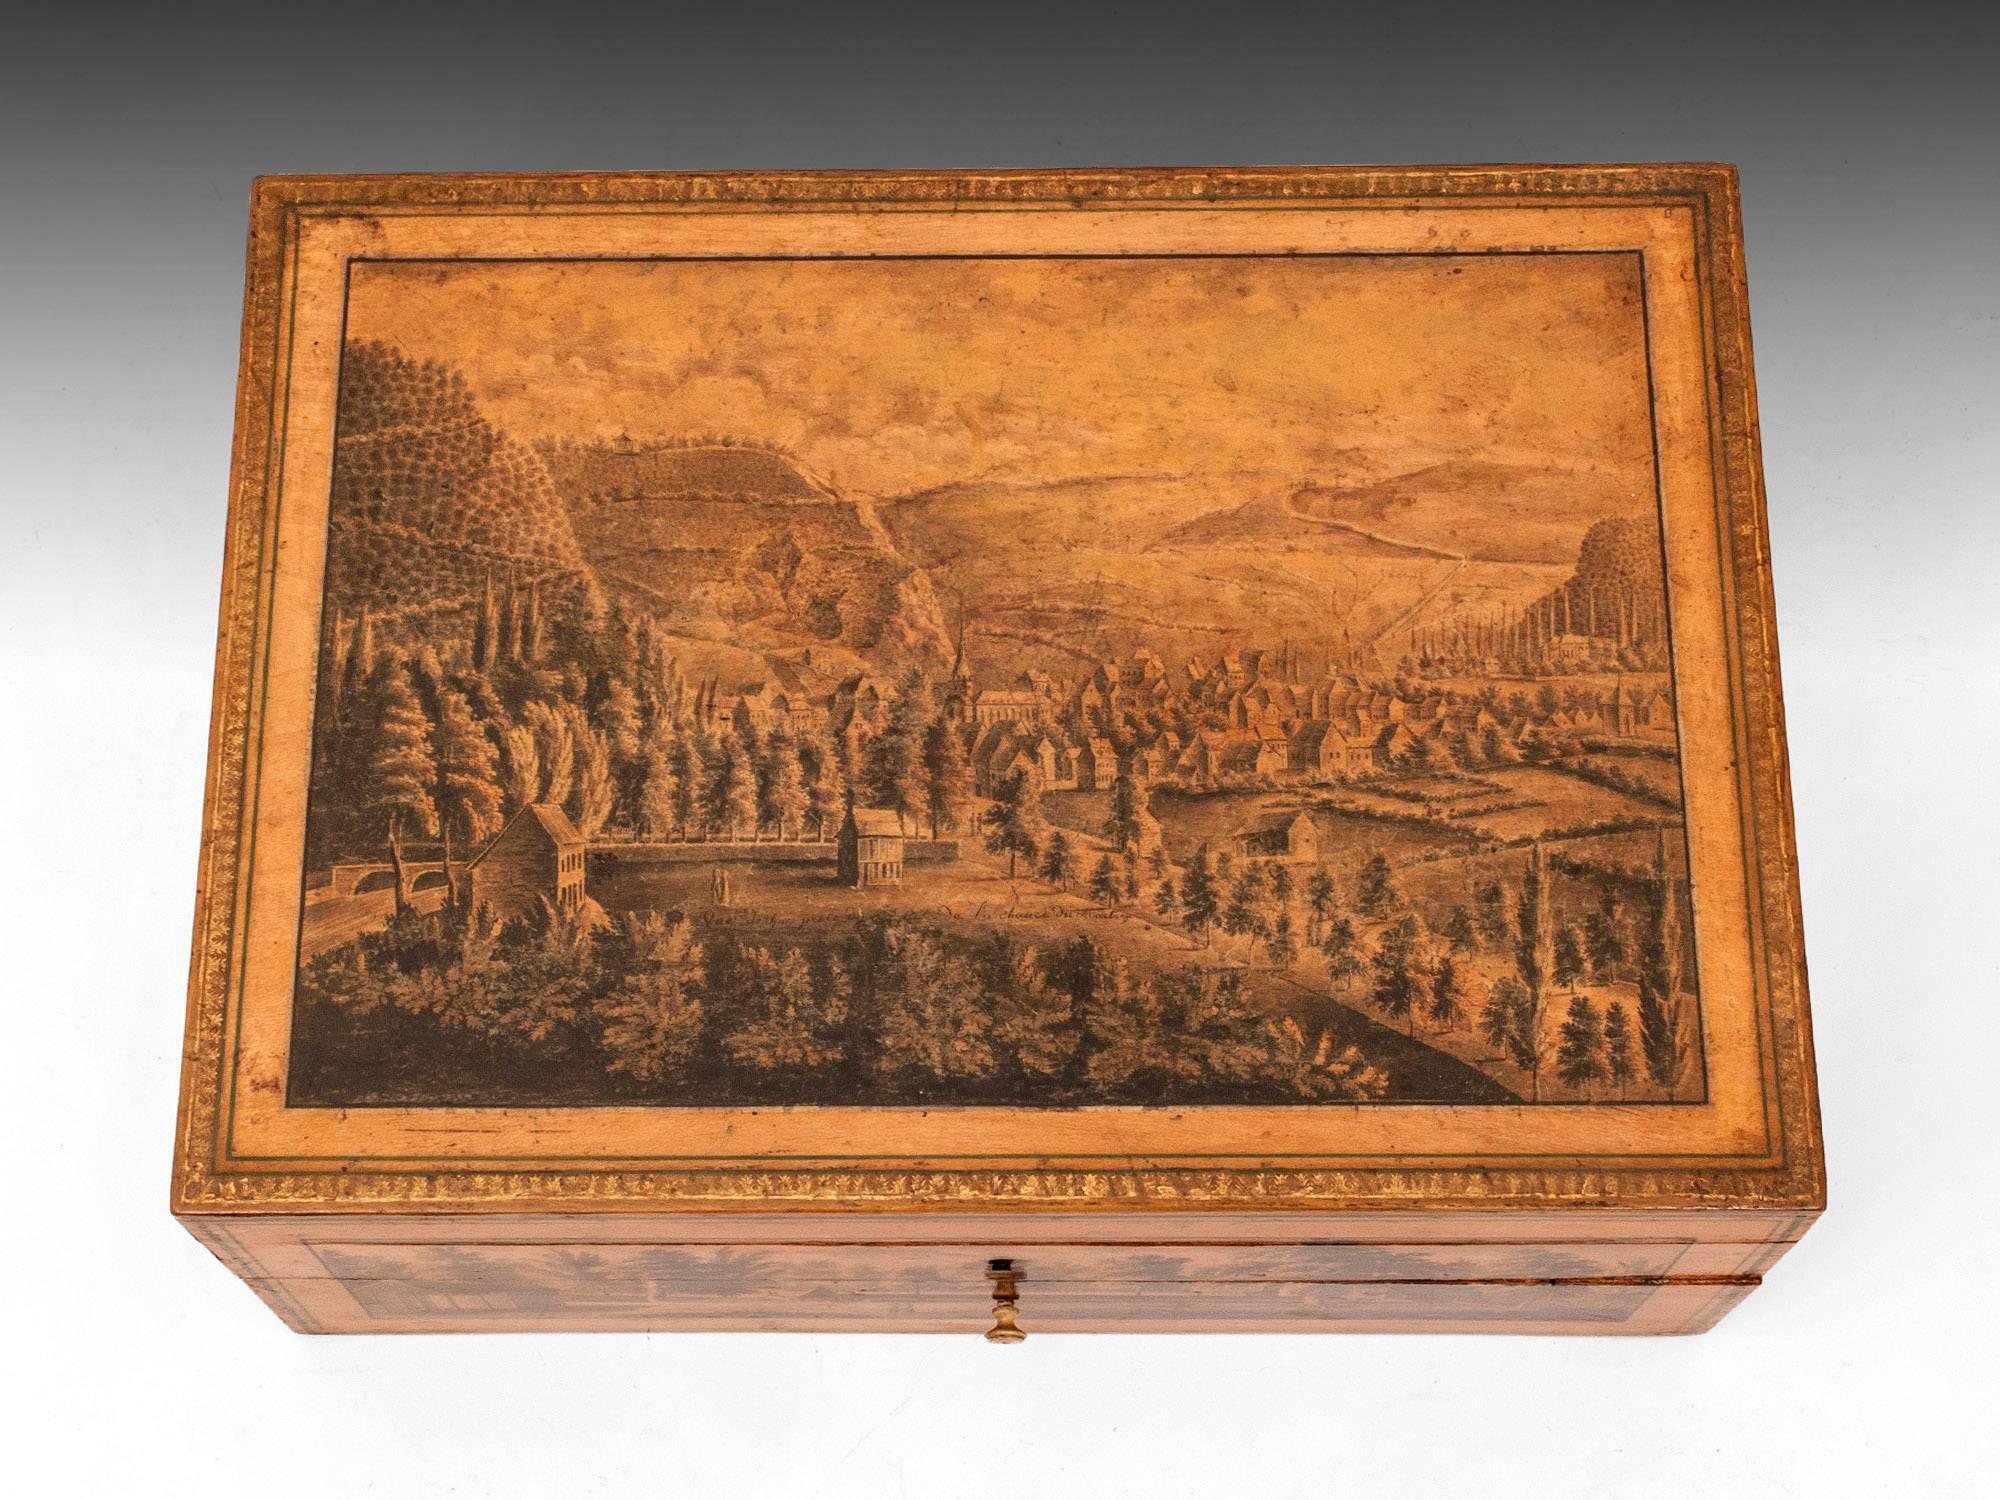 A rare and beautifully decorated spa sewing box, depicting skillfully hand-decorated scenes around the Belgian town of Spa in the Ardennes mountains. Each detailed scene is framed with two single green lines, with the top having a floral gold leaf